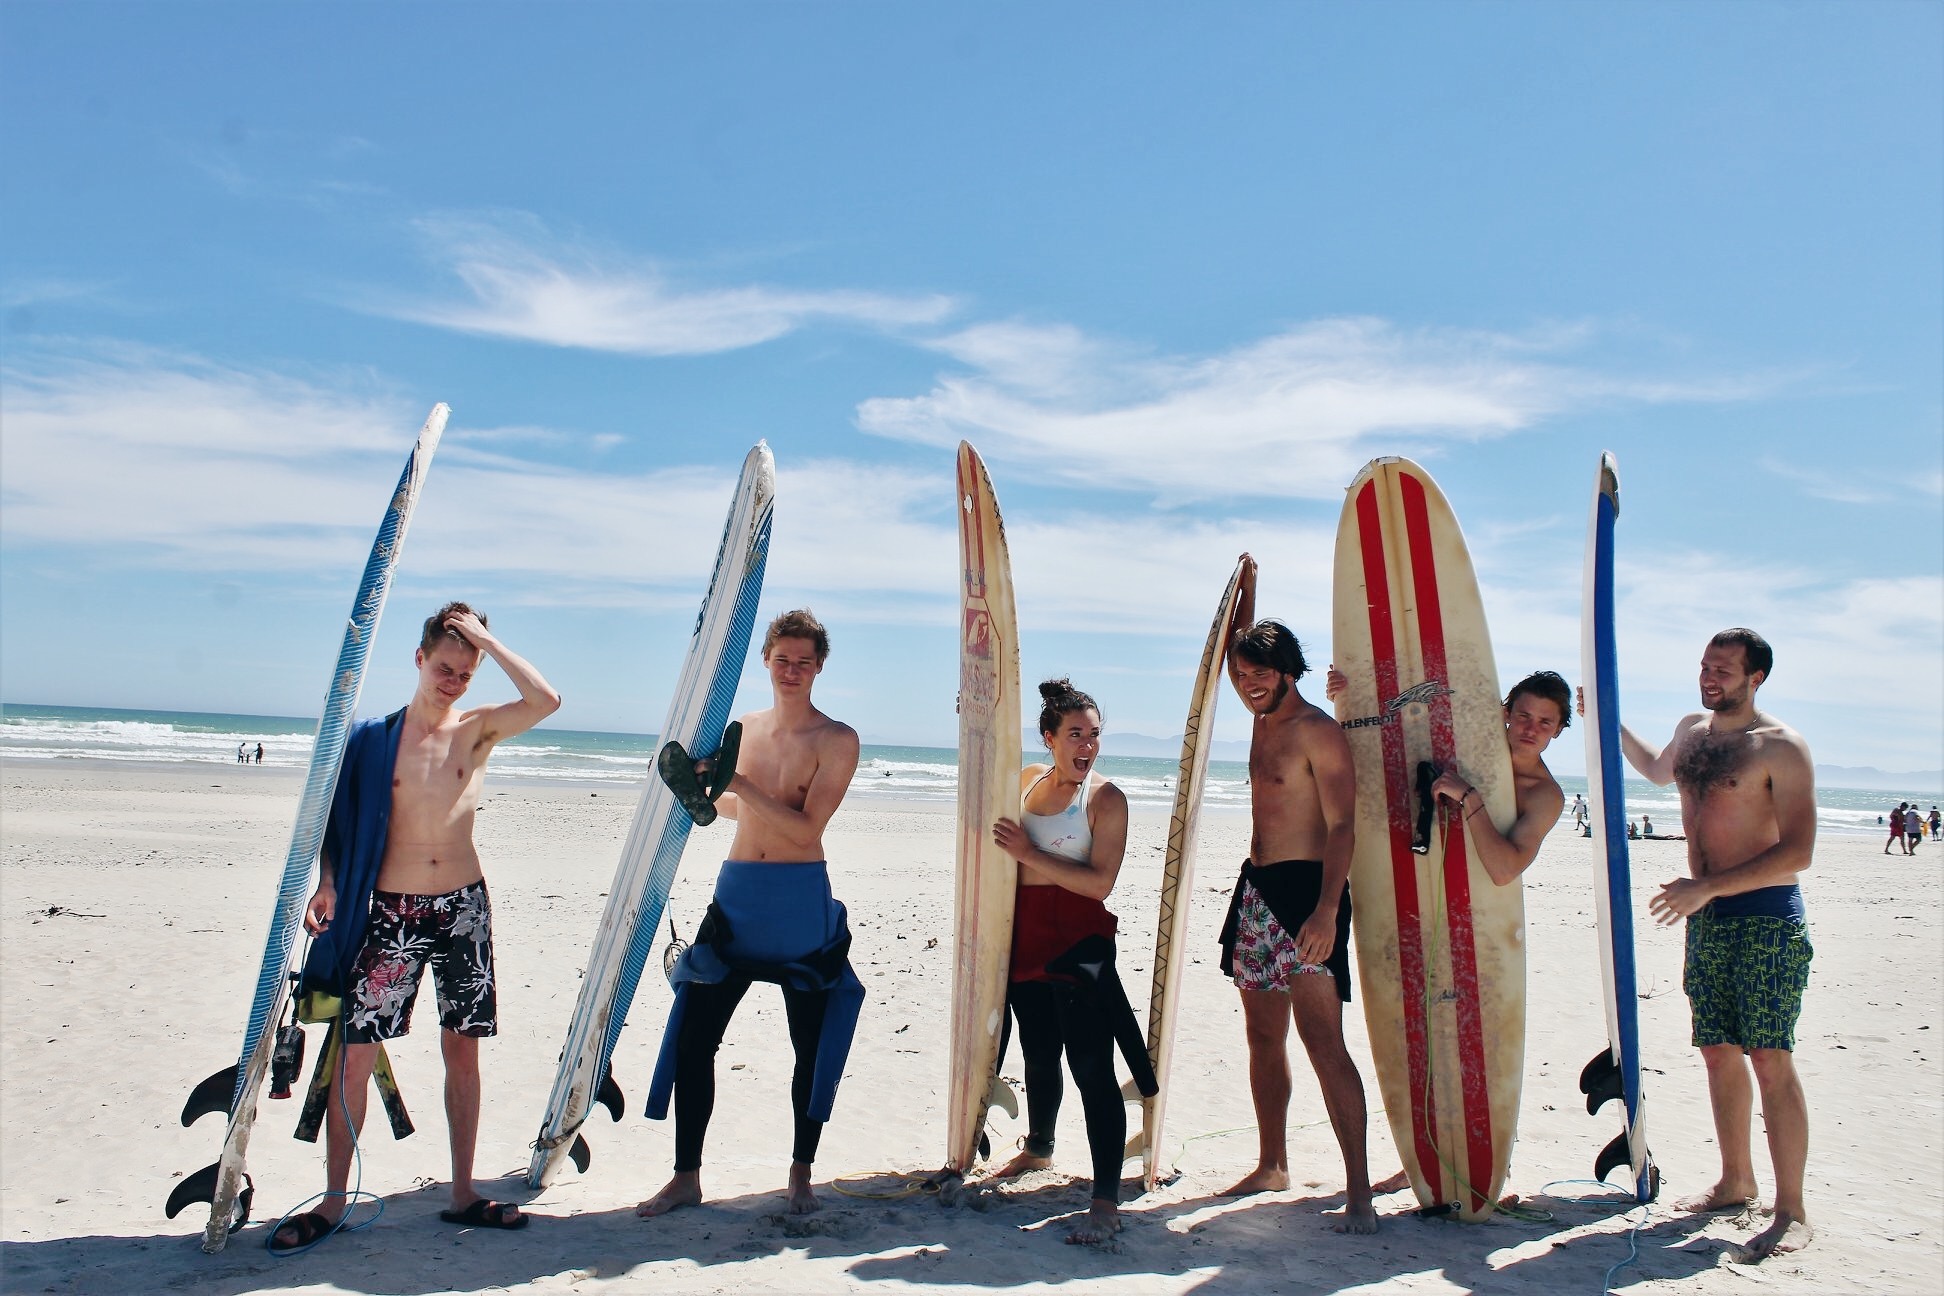 Students on the beach with their surfboards in Stellenbosch, South Africa.